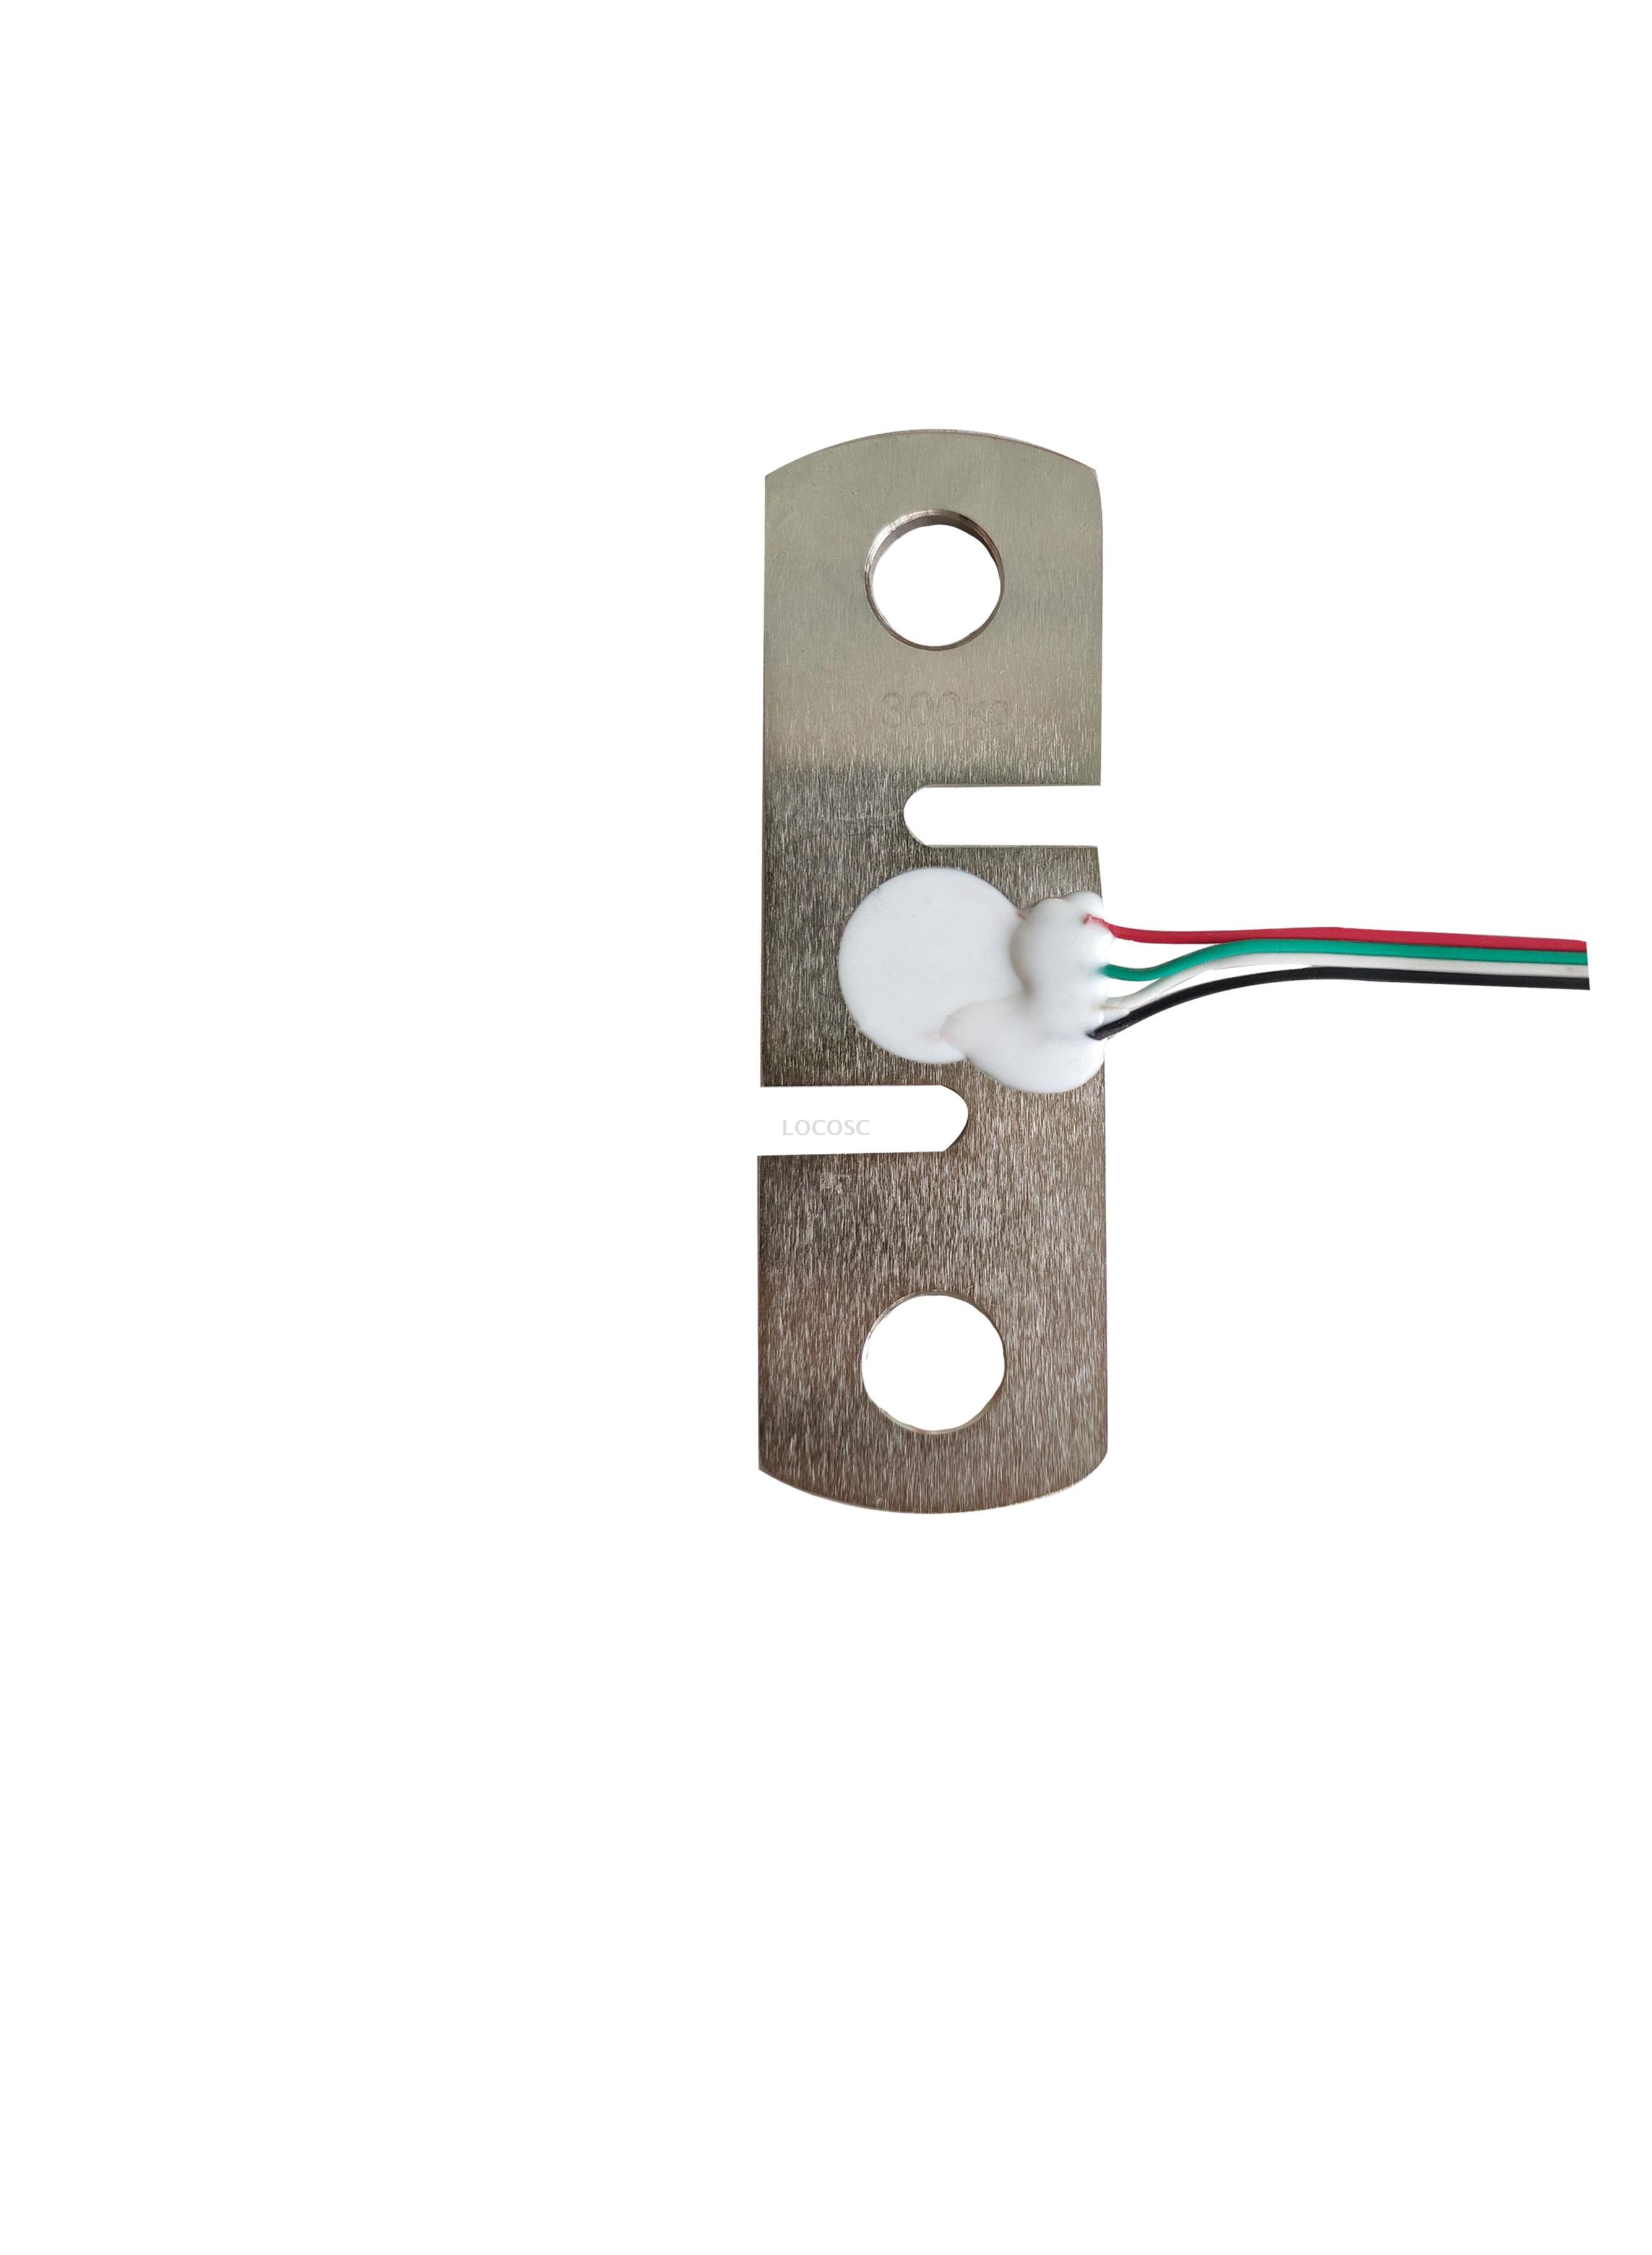 LP7145B Tension Load Cell